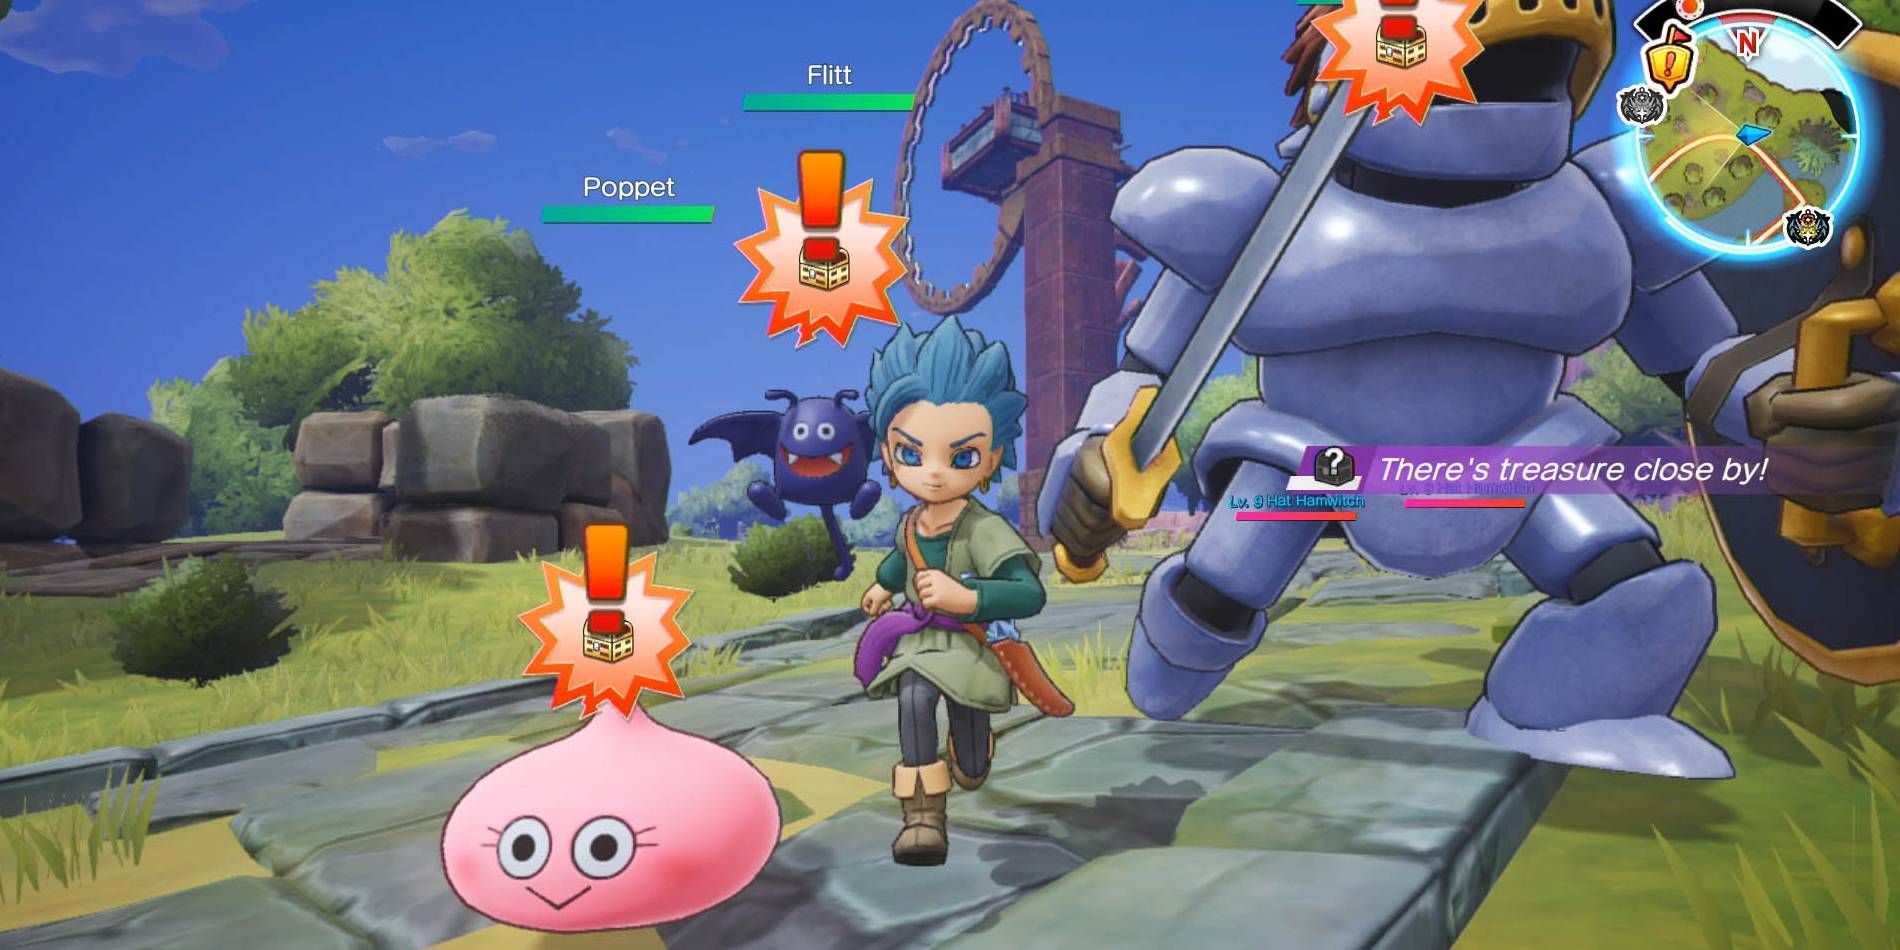 The Best Monsters To Recruit In Dragon Quest Treasures